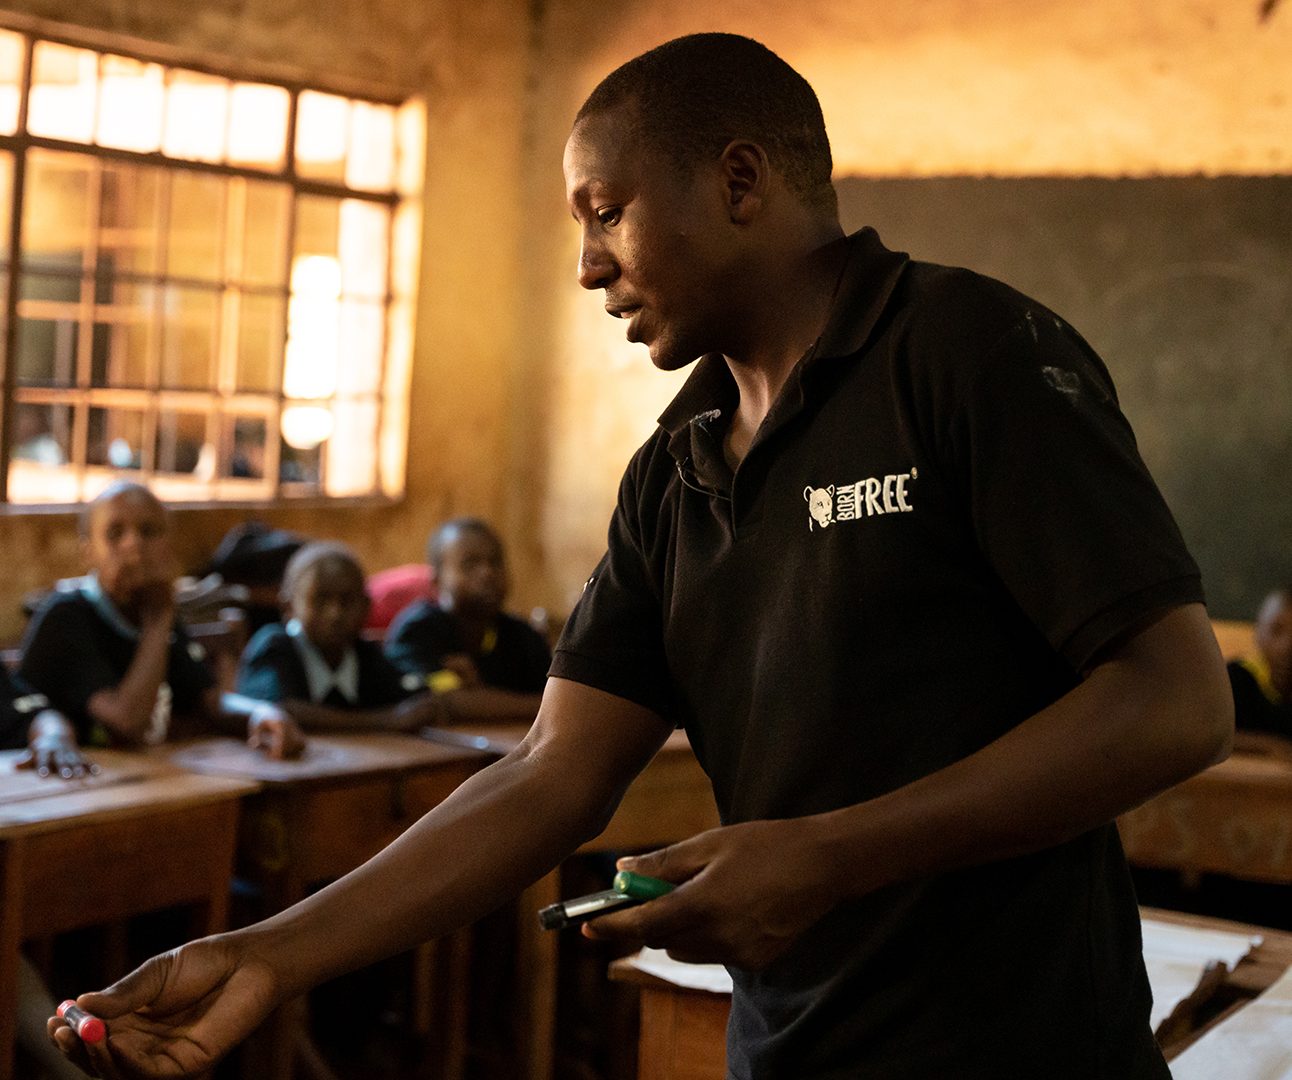 A Kenyan classroom with children in the background and a man in Born Free shirt at the front